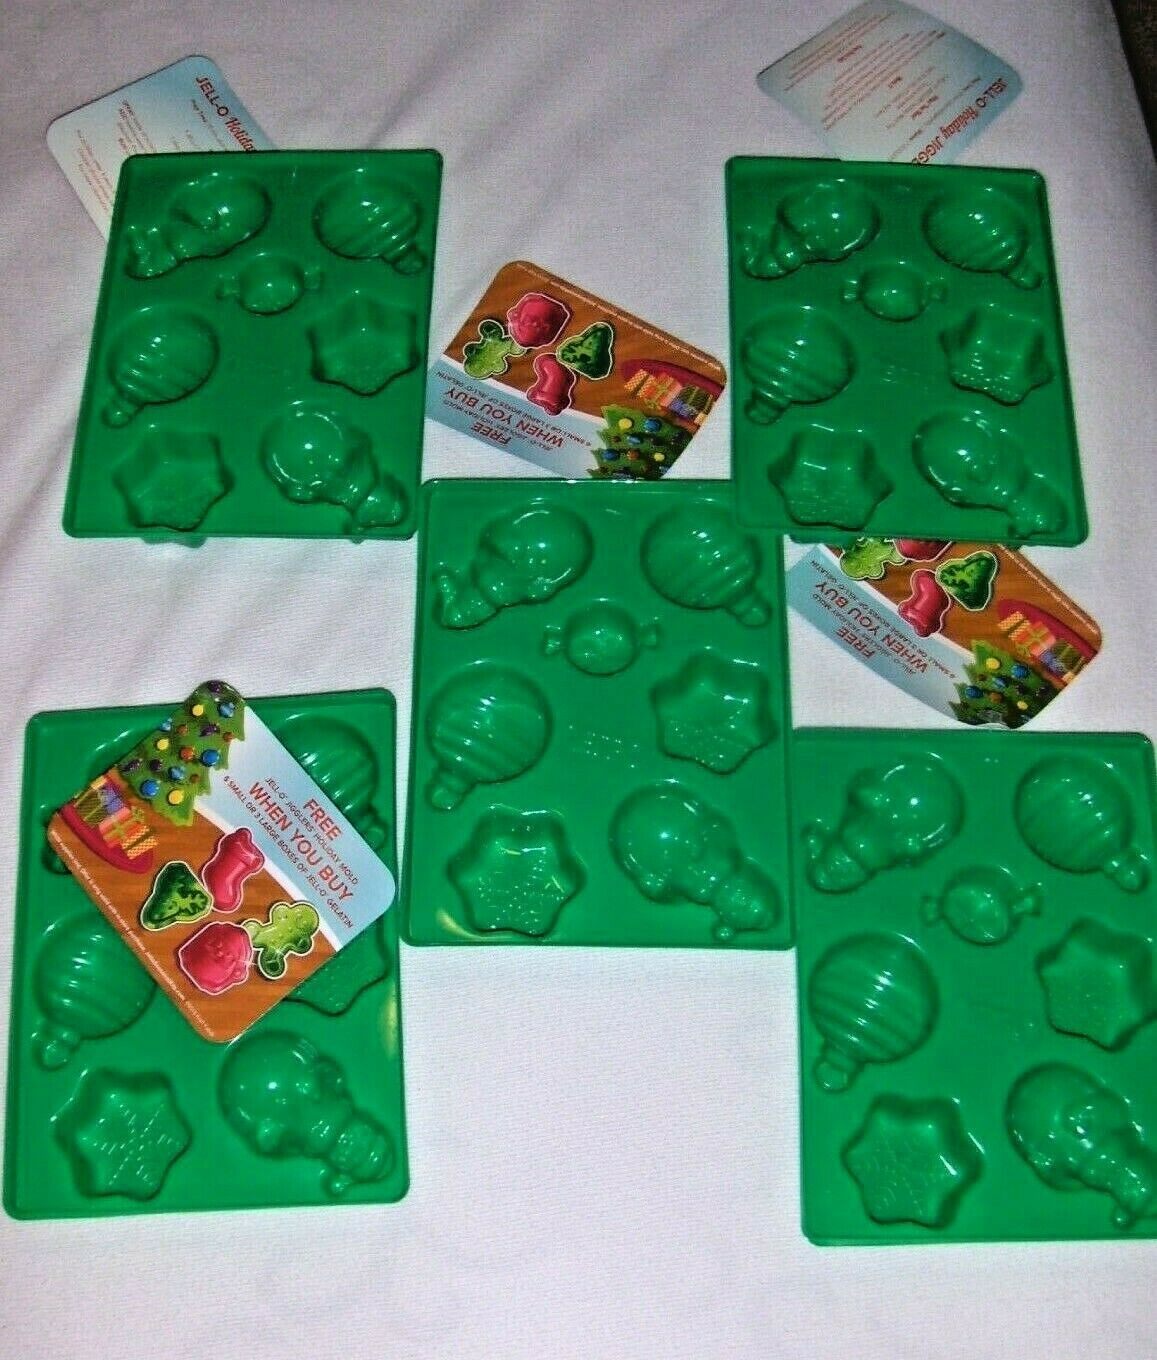 5 Jell-o  Green Holiday Jigglers Molds New